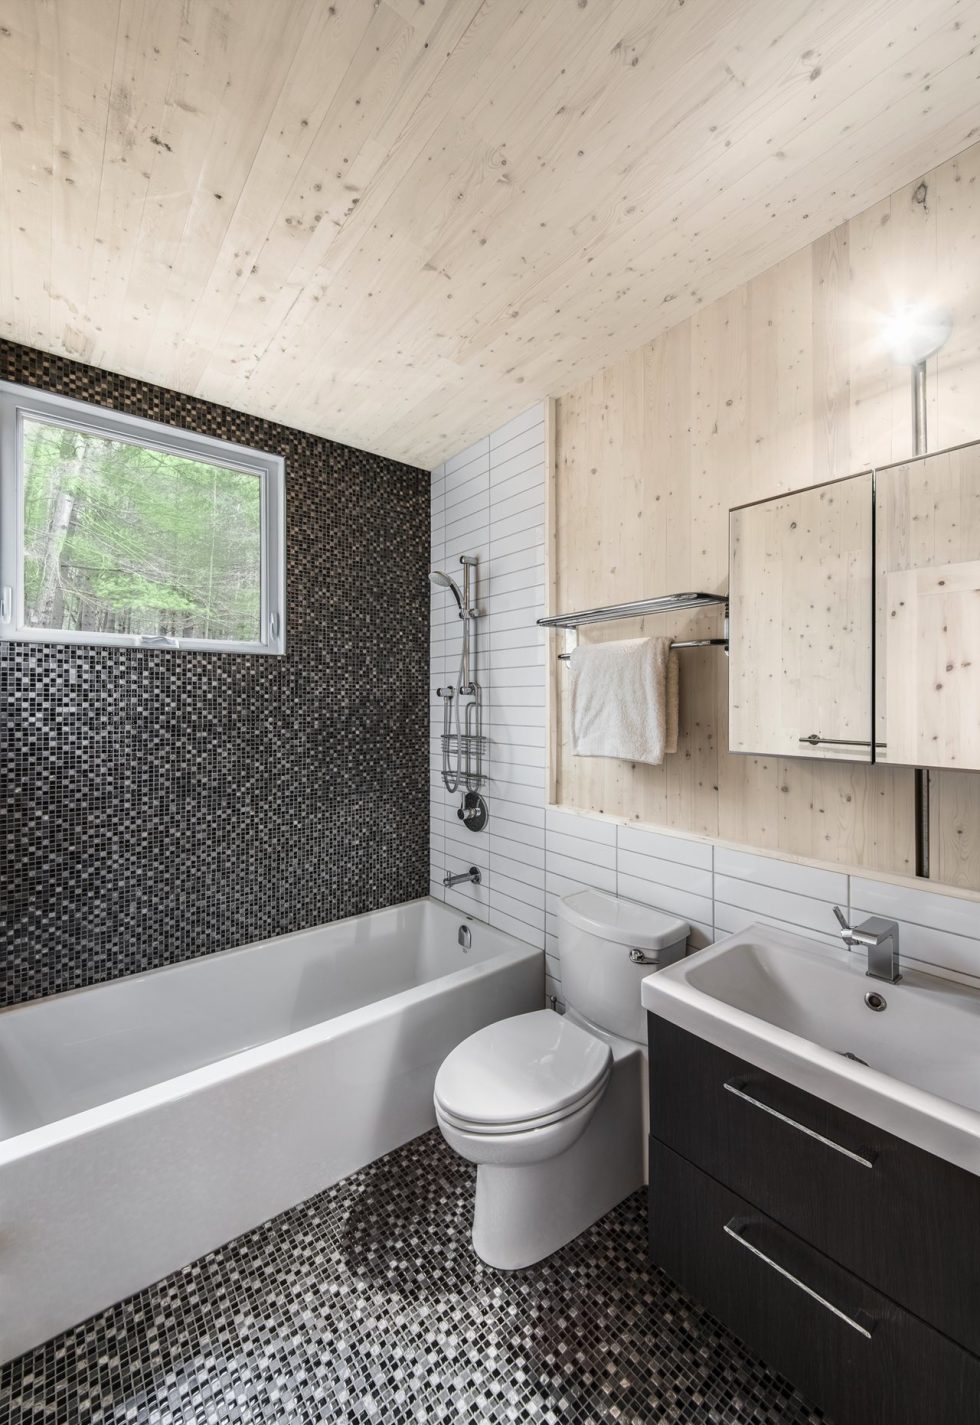 The new house on the site of an old cottage in Canada - bathroom